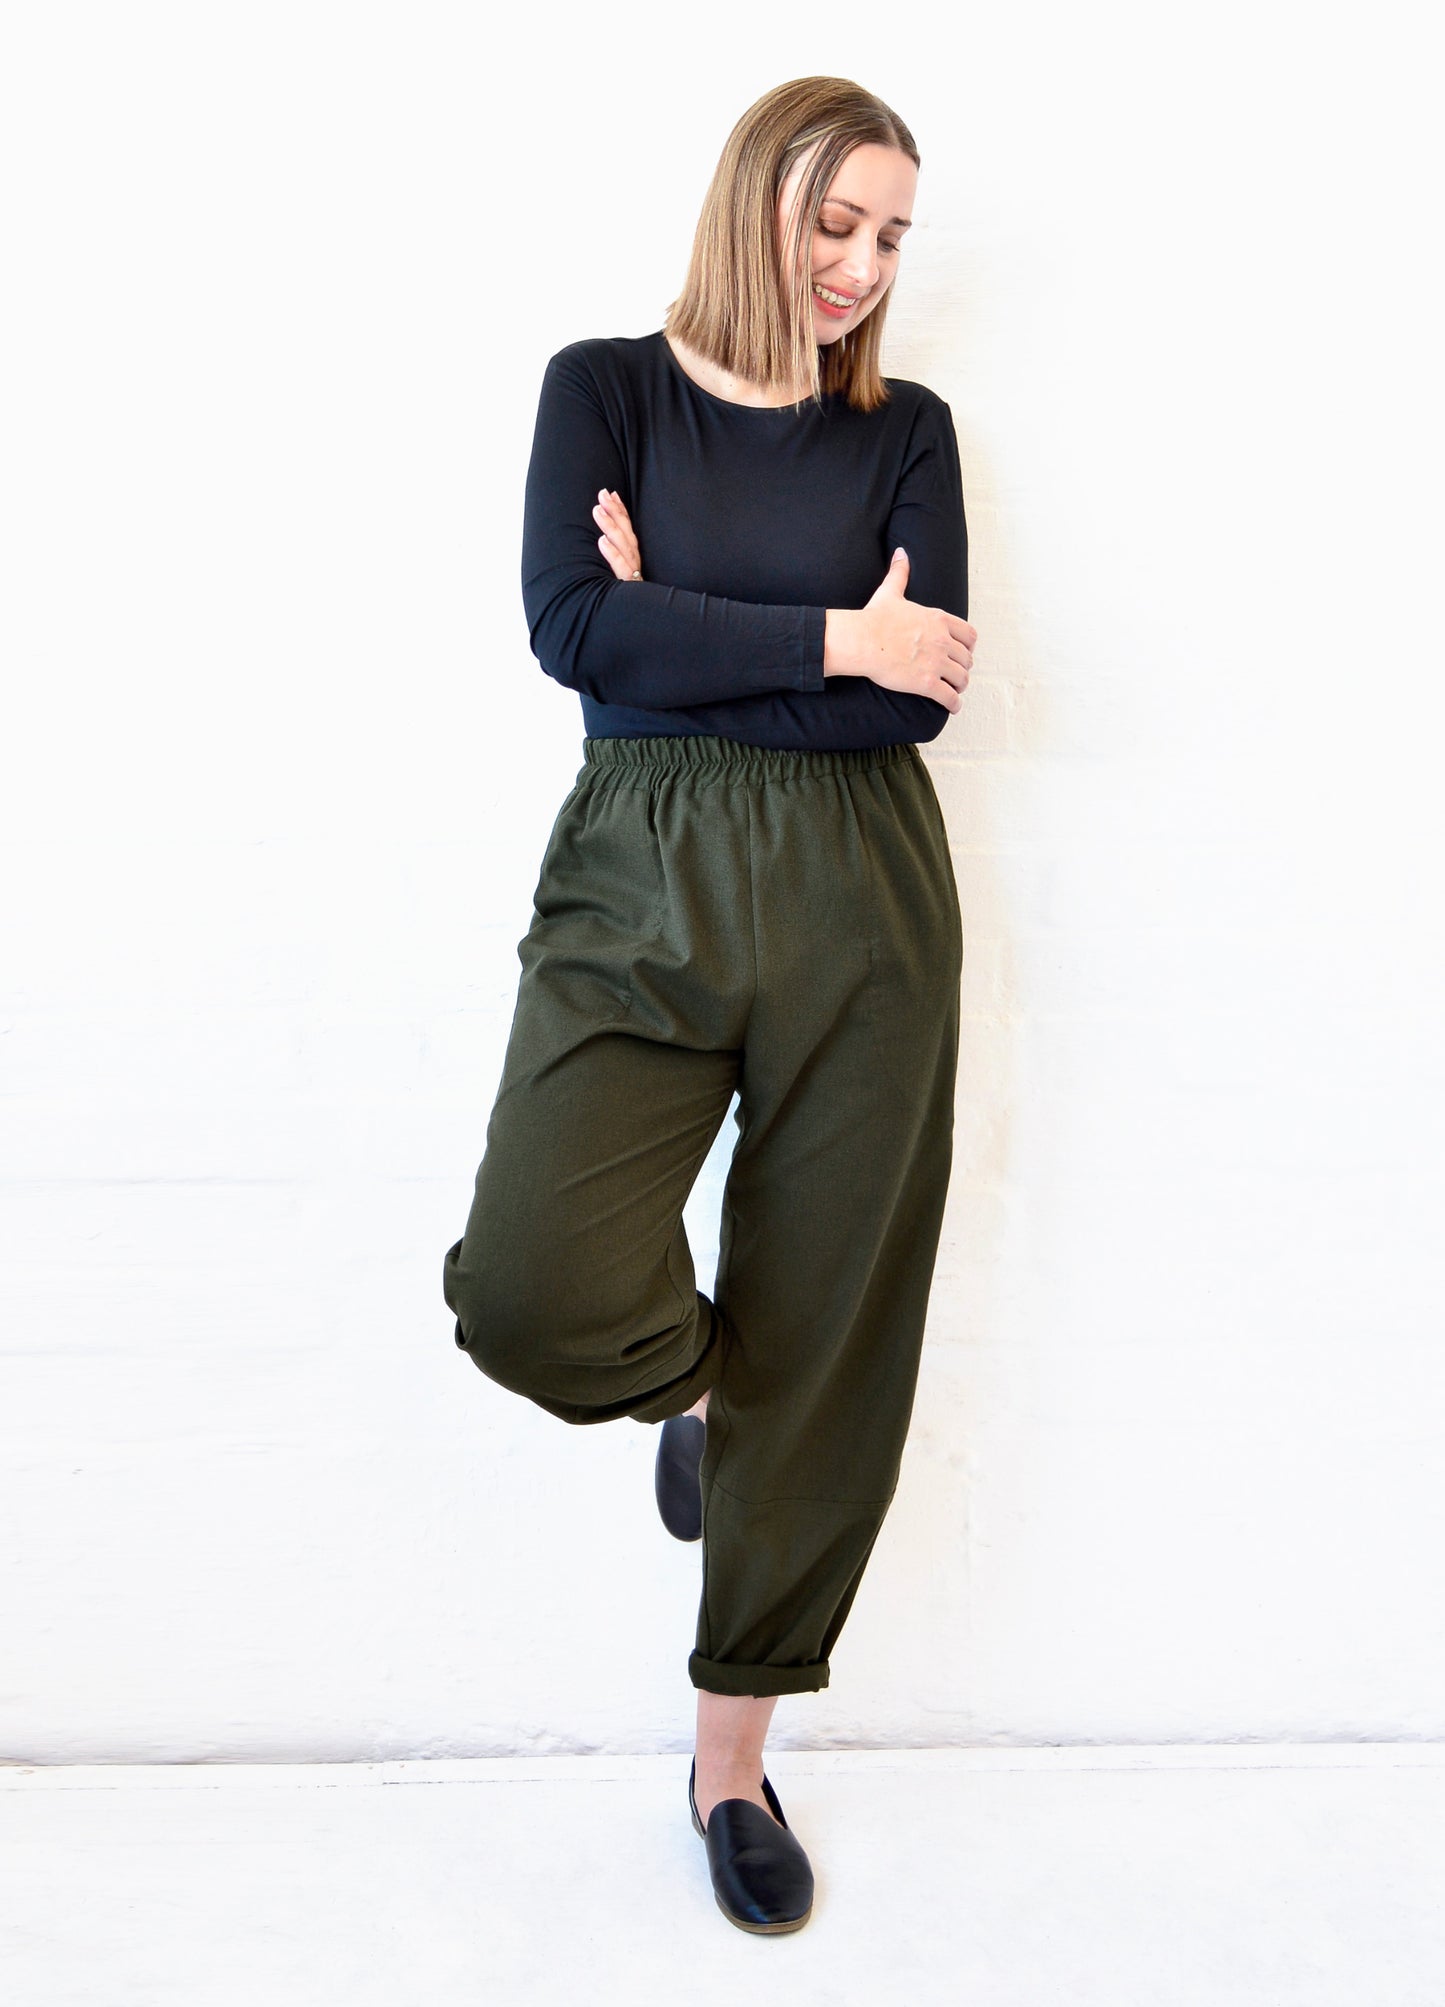 Sophie Lantern Trousers in Military